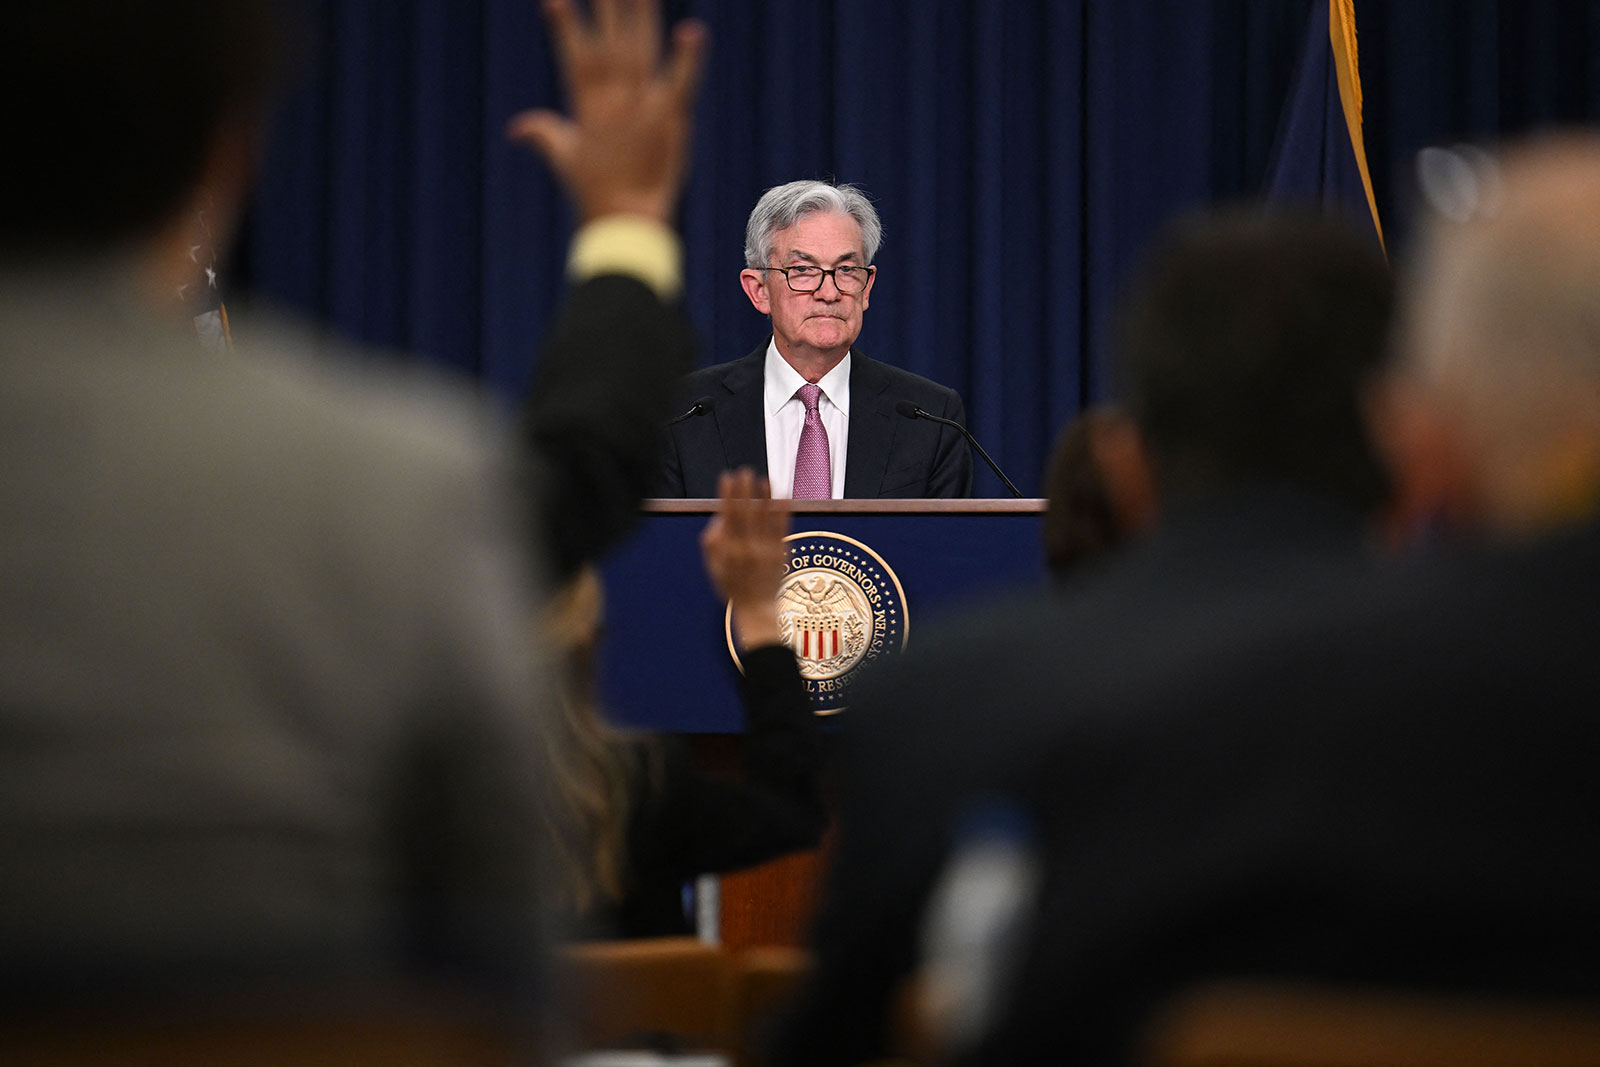 Federal Reserve Chairman Jerome Powell speaks during a news conference in Washington, DC, on May 4.